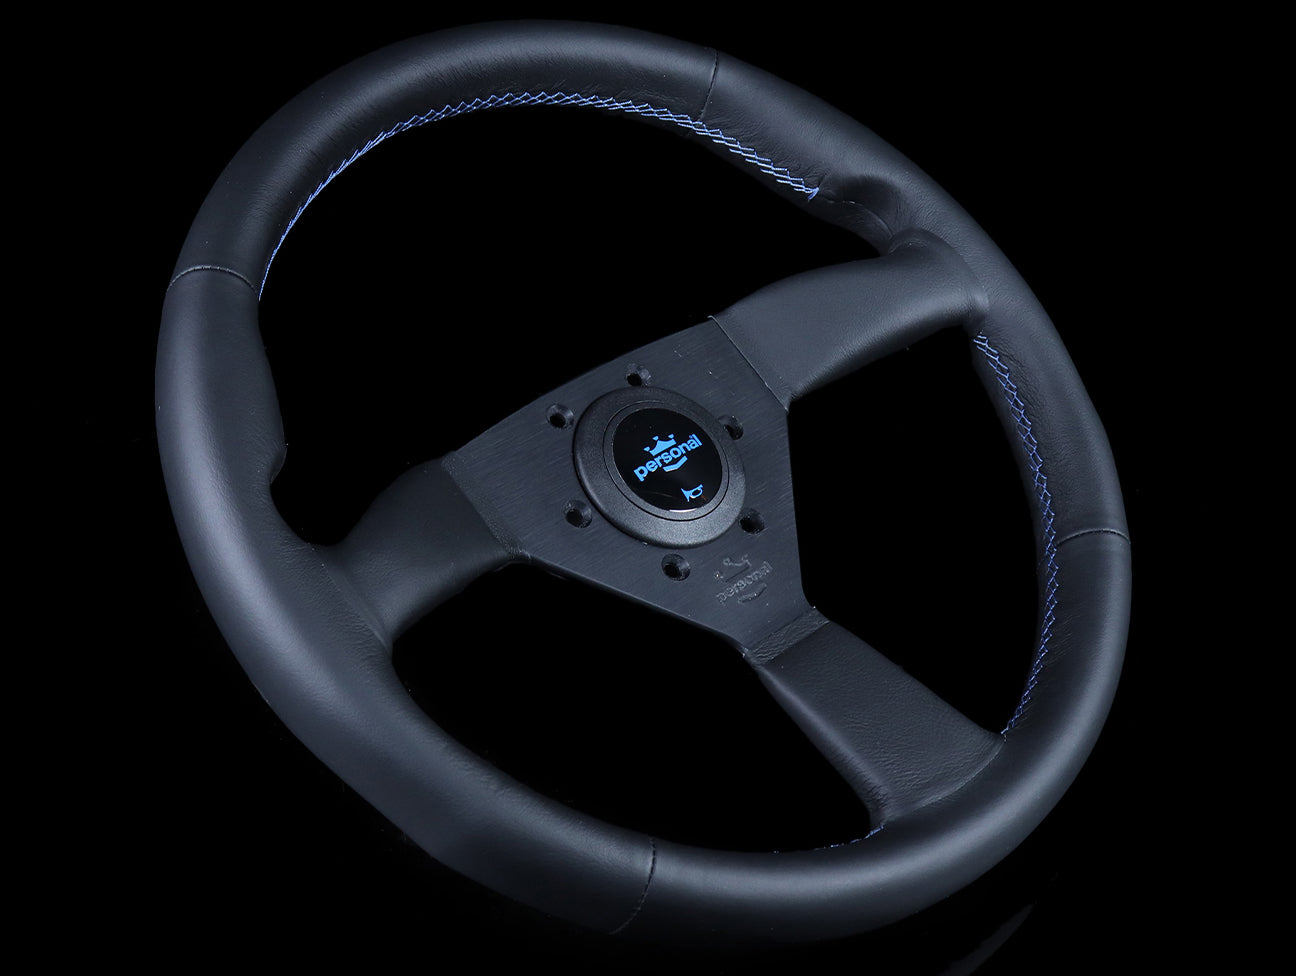 Personal Neo Eagle 340mm Steering Wheel - Black Leather / Blue Stitch